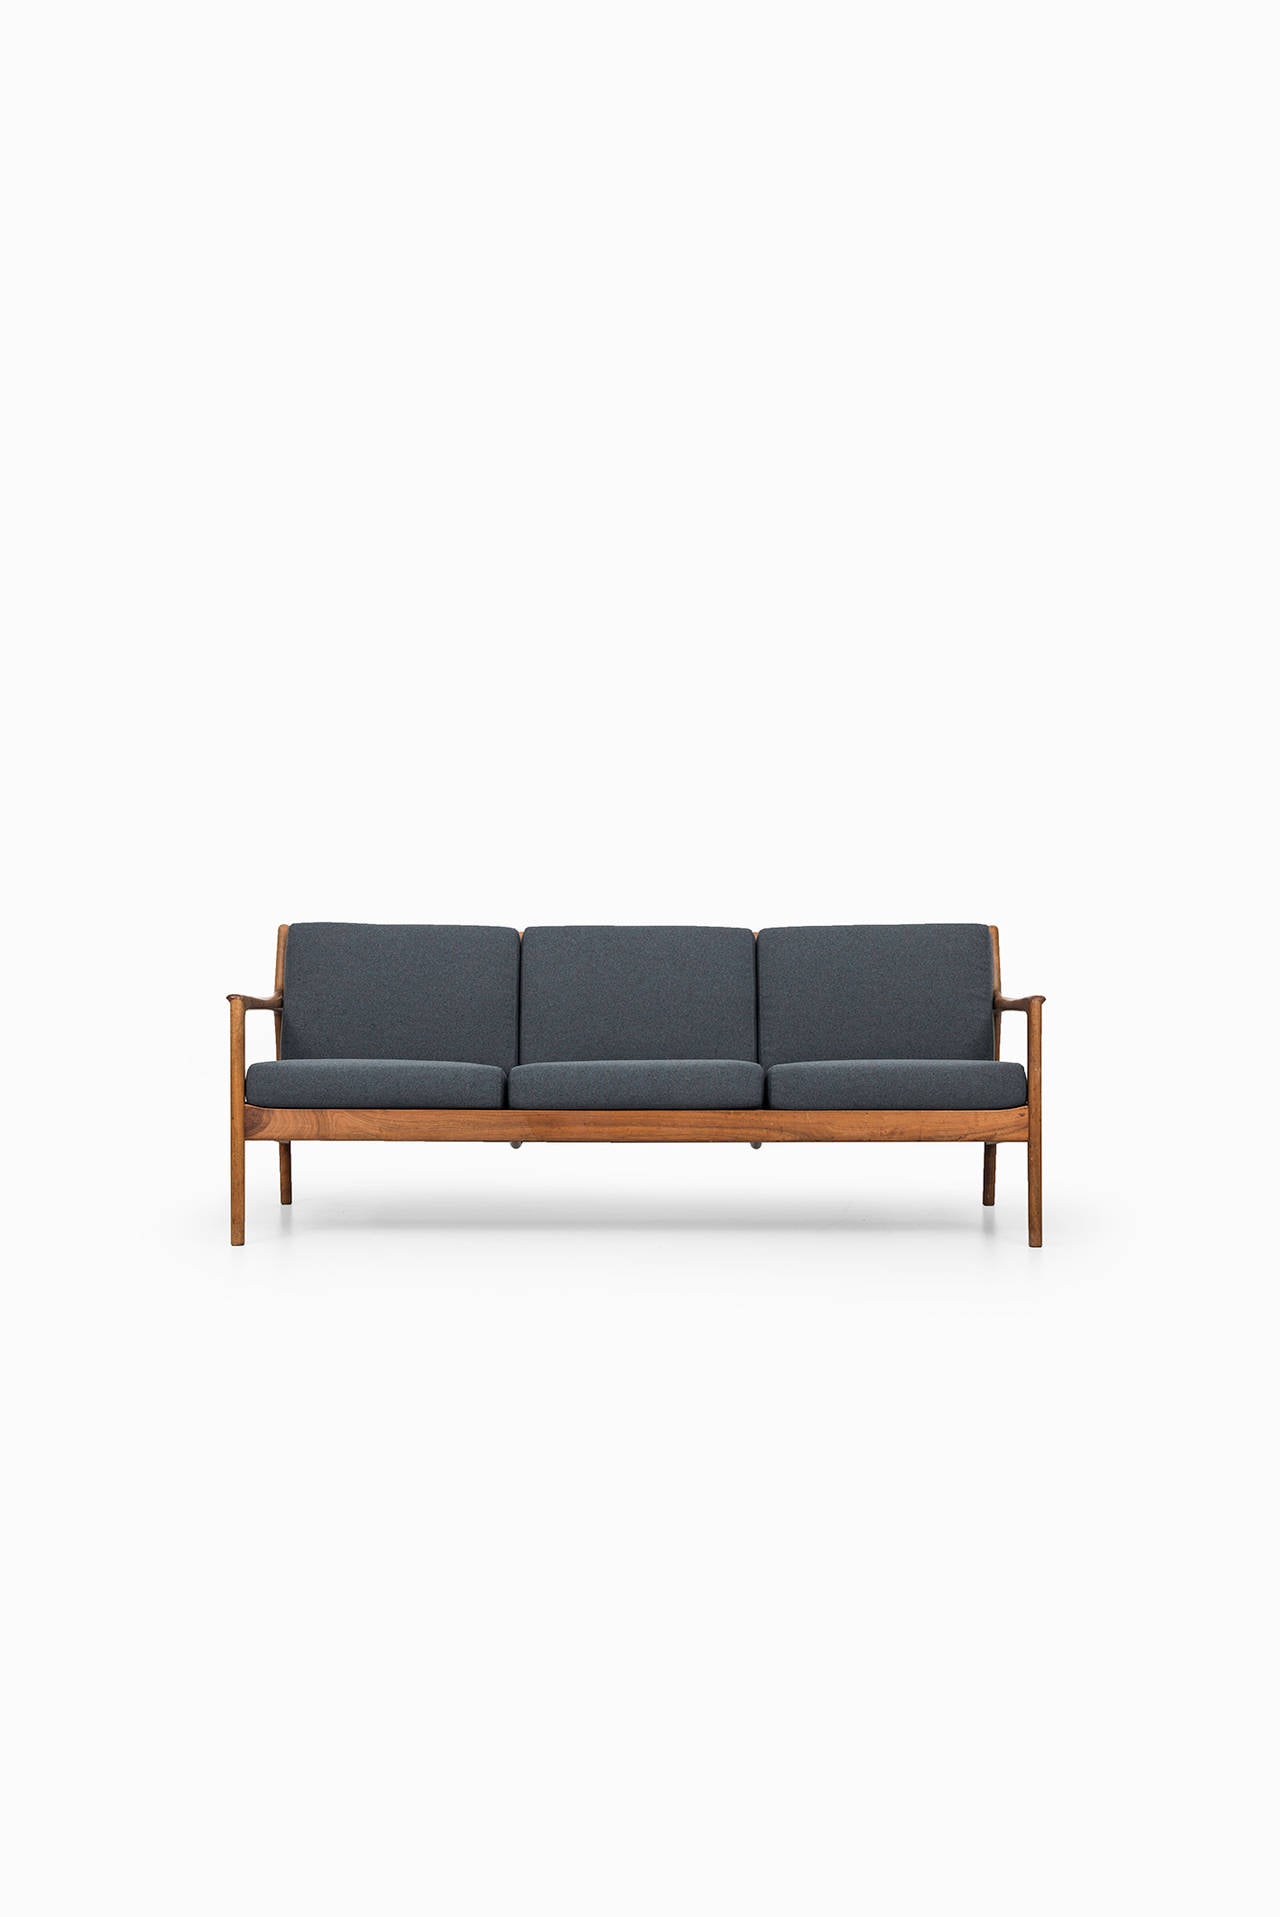 Sofa model USA-75 designed by Folke Ohlsson. Produced by Dux in Sweden. Walnut and newly re-upholstered fabric. Matching pair of easy chairs is also available.